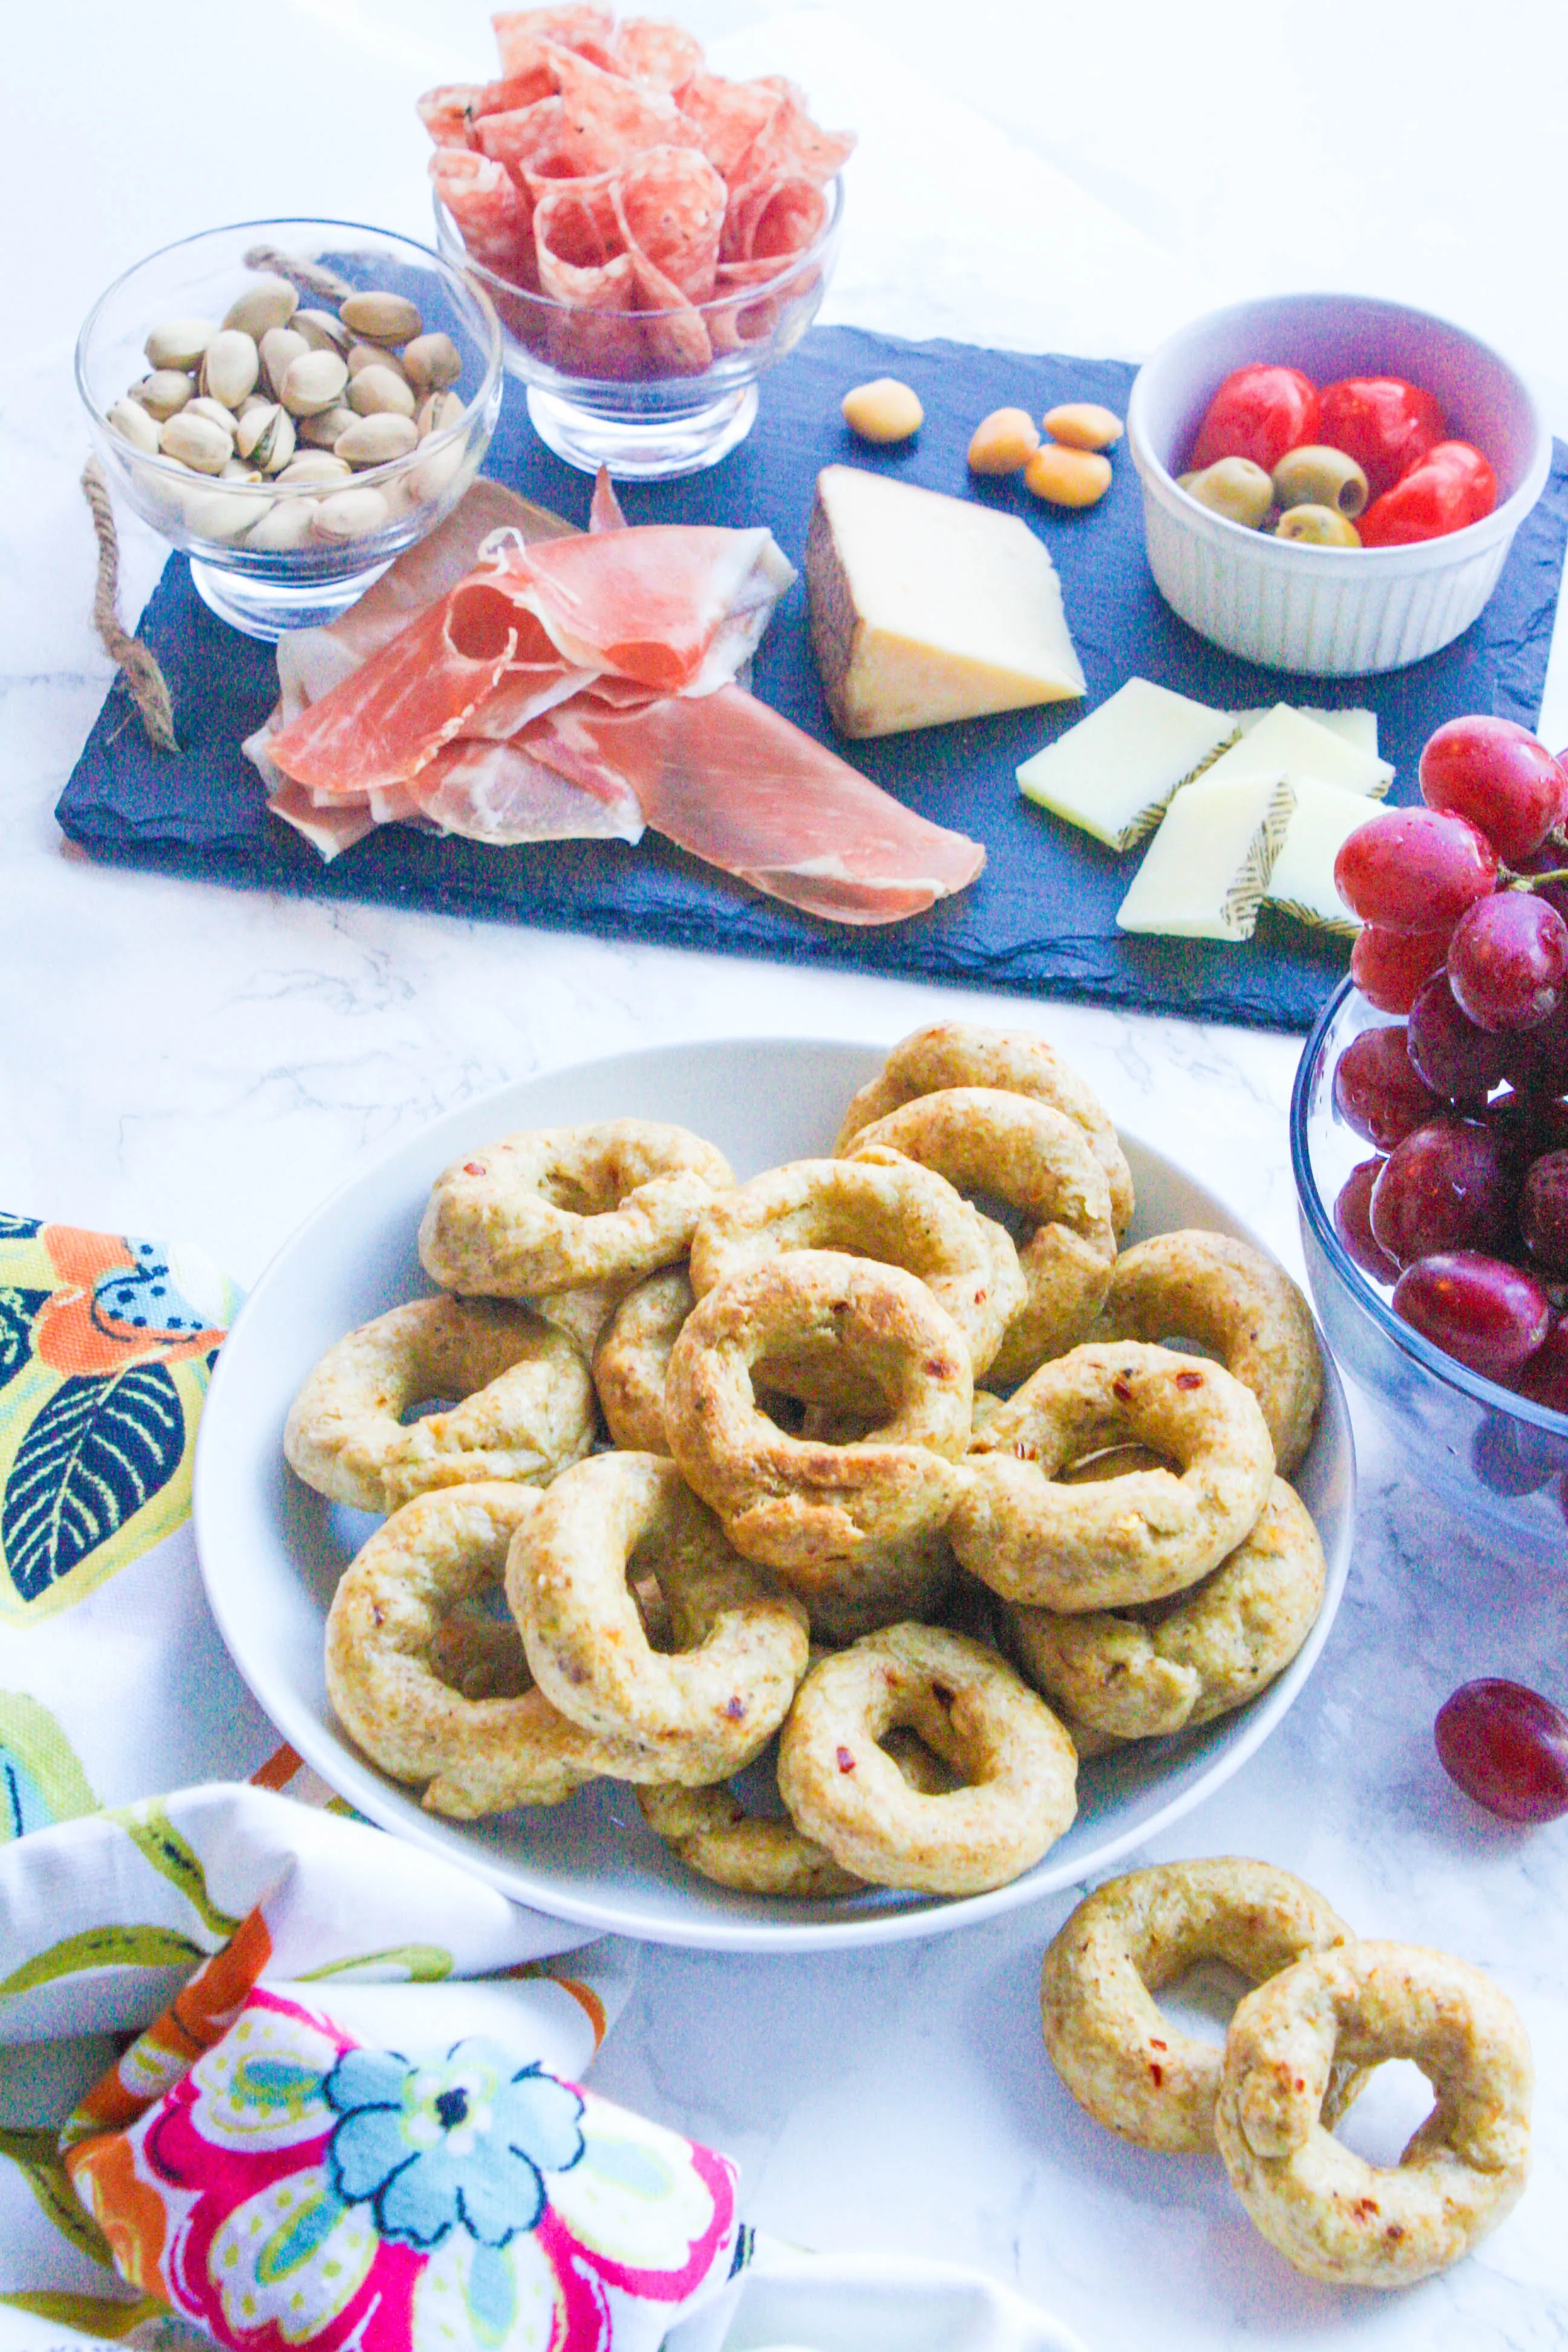 Red Pepper Italian Taralli (Breadstick Rings) are a wonderful snack for anytime. Red Pepper Italian Taralli (Breadstick Rings) make a tasty treat for any occasion.